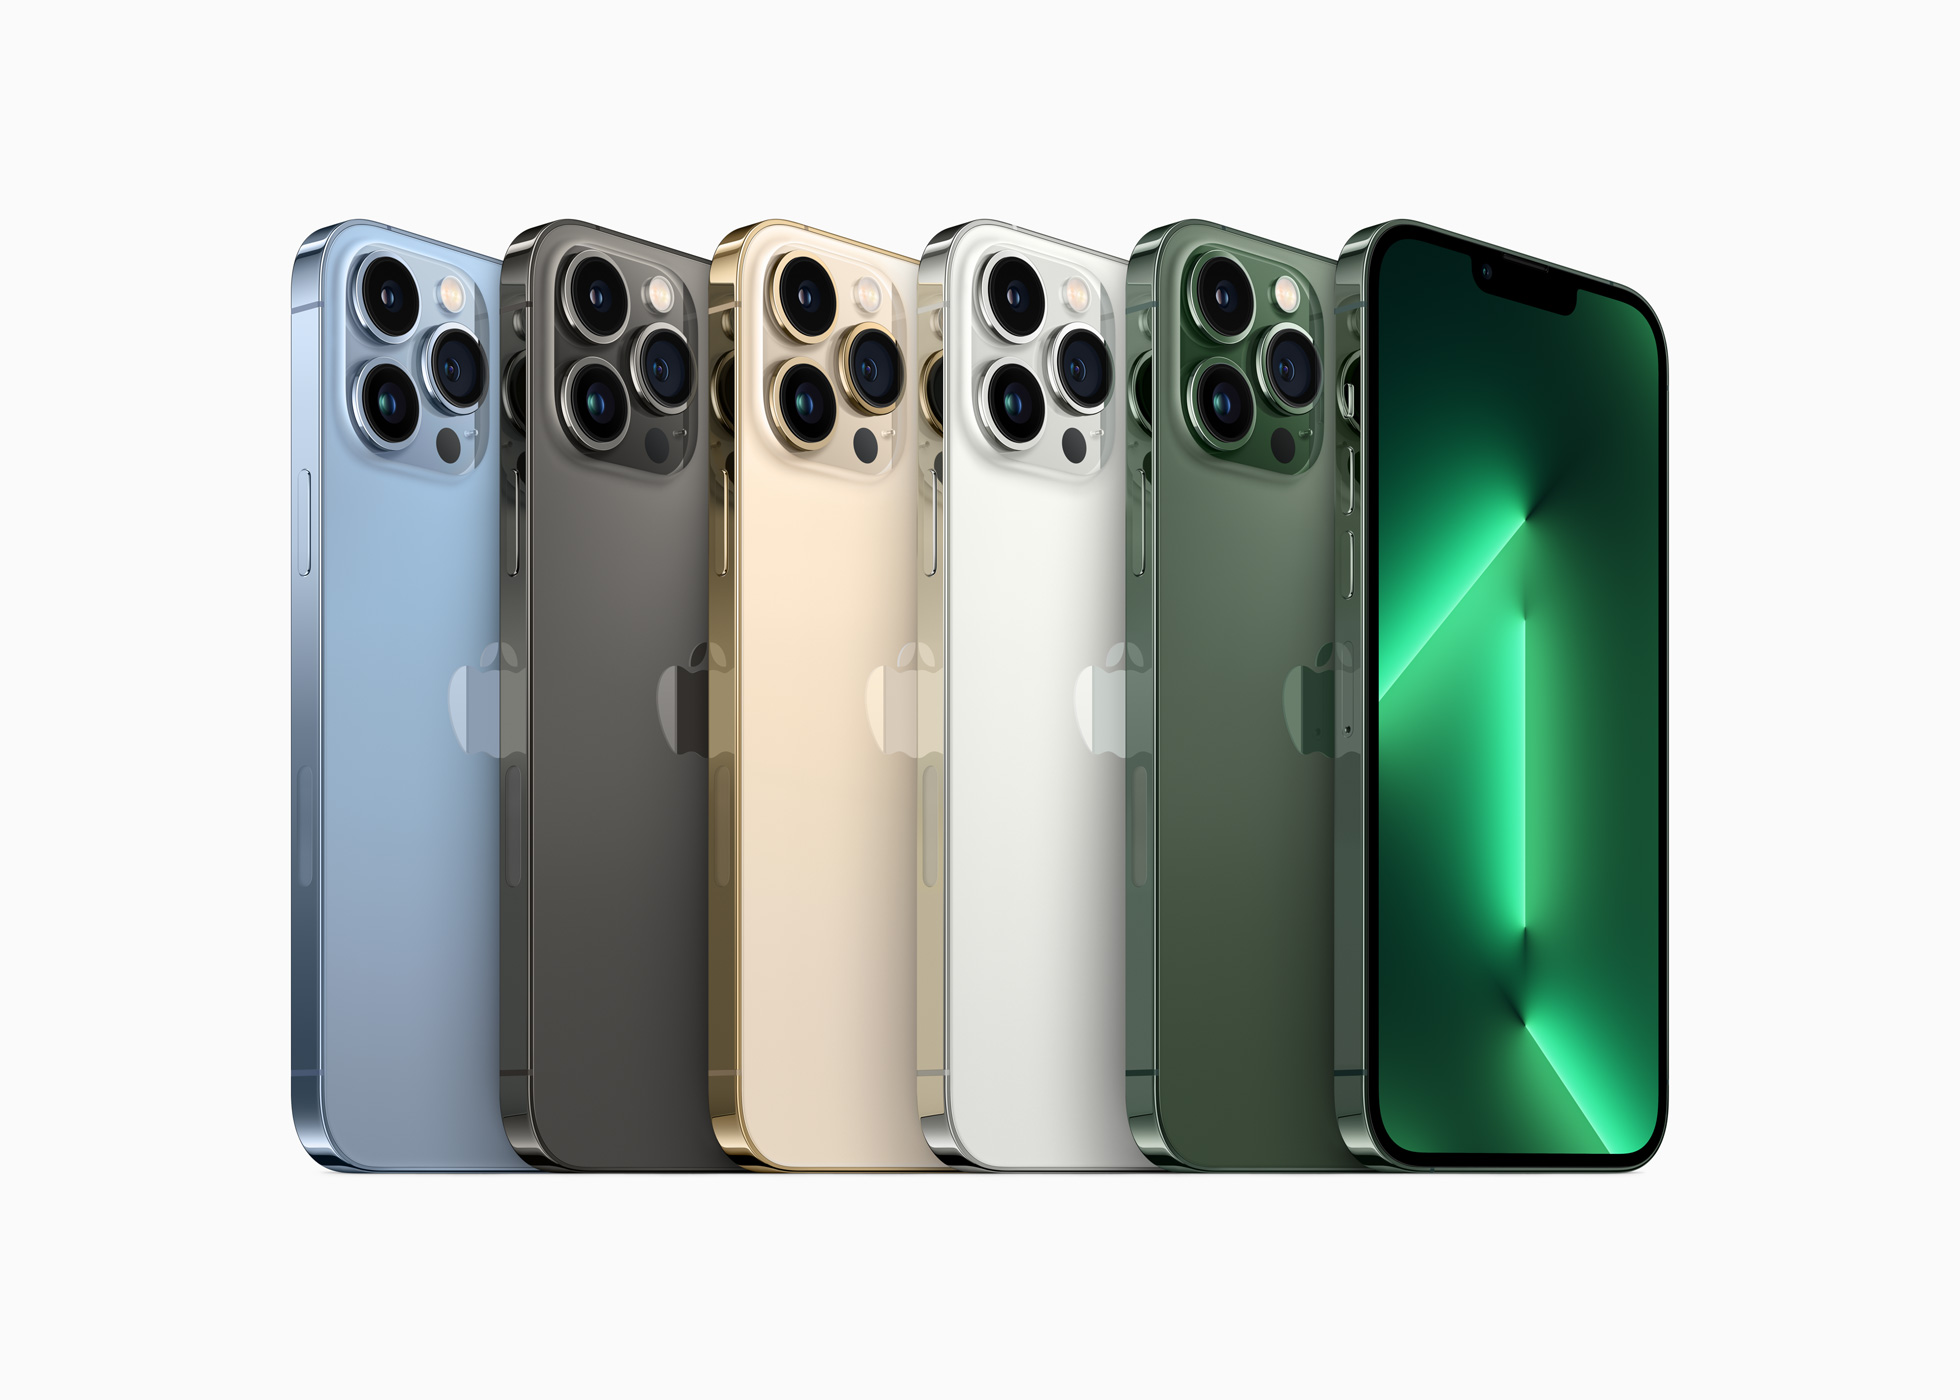 Apple iPhone 13 Pro color lineup 2022